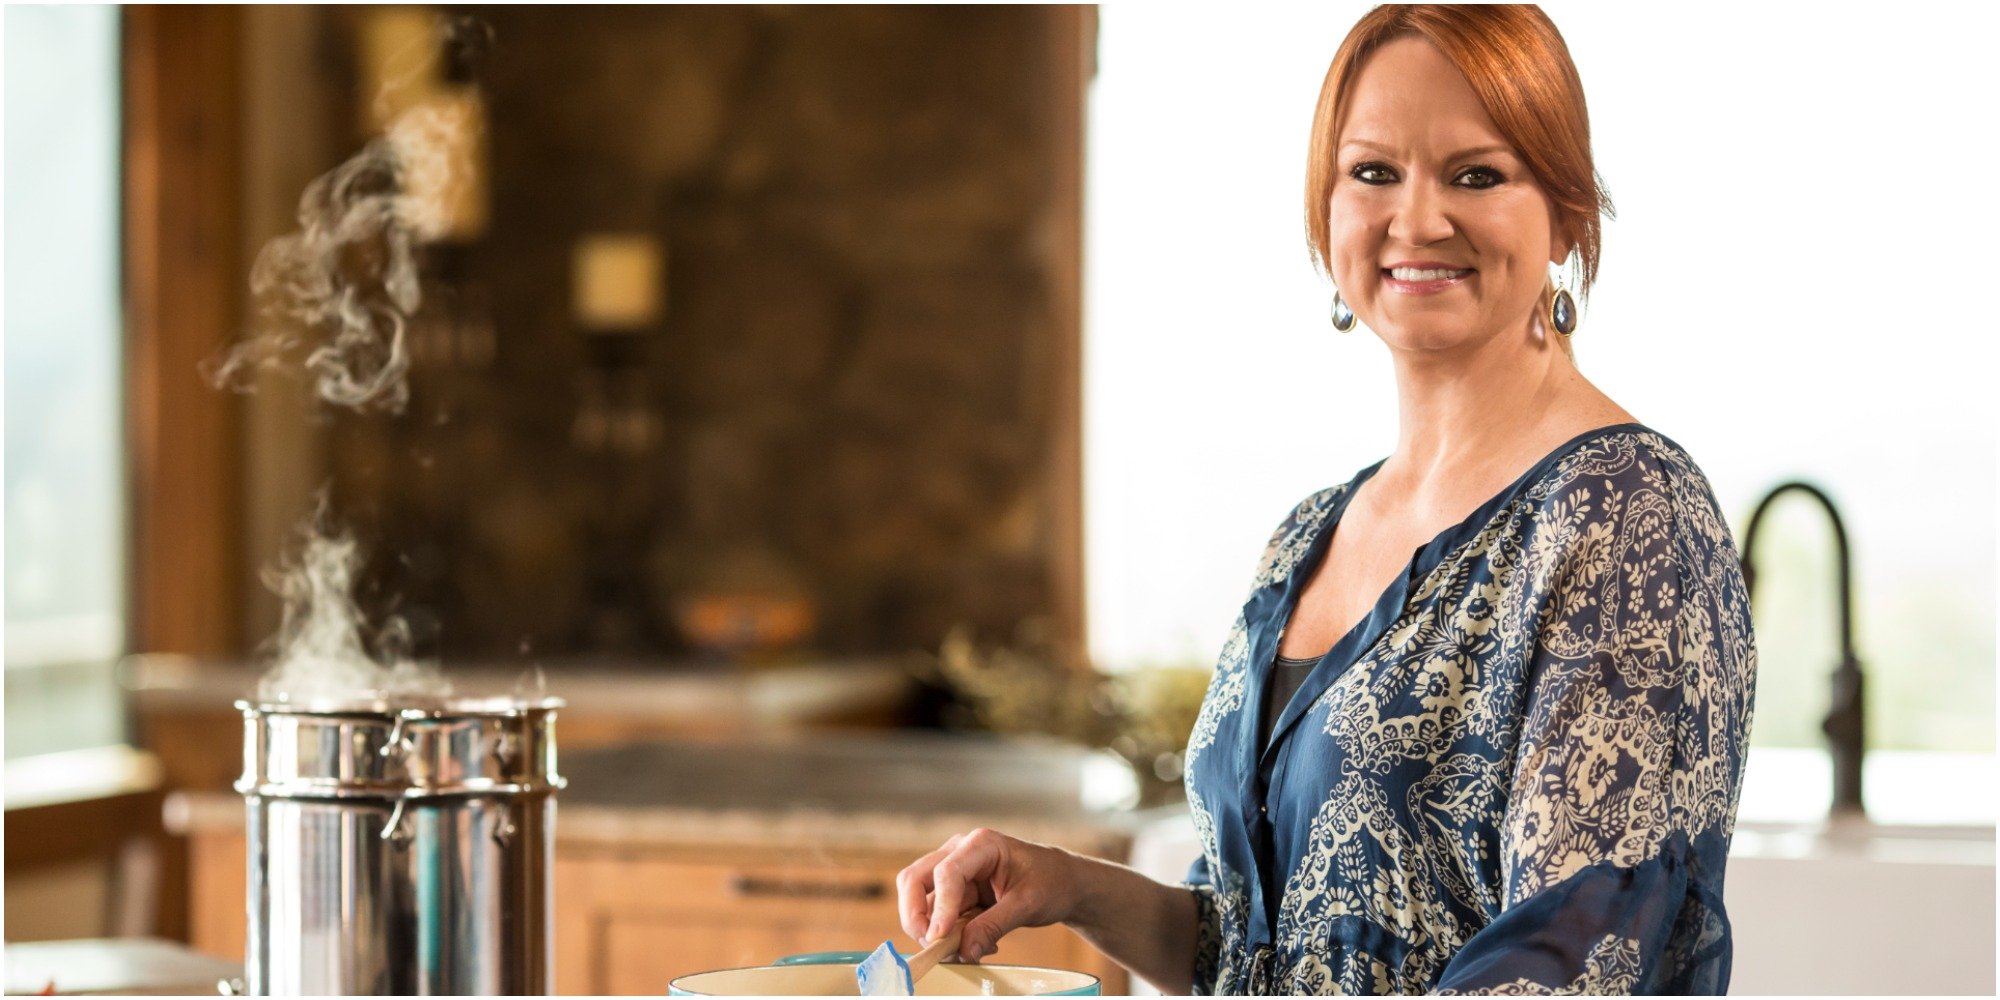 Ree Drummond cooks in her kitchen at the lodge on 'The Pioneer Woman' television show.